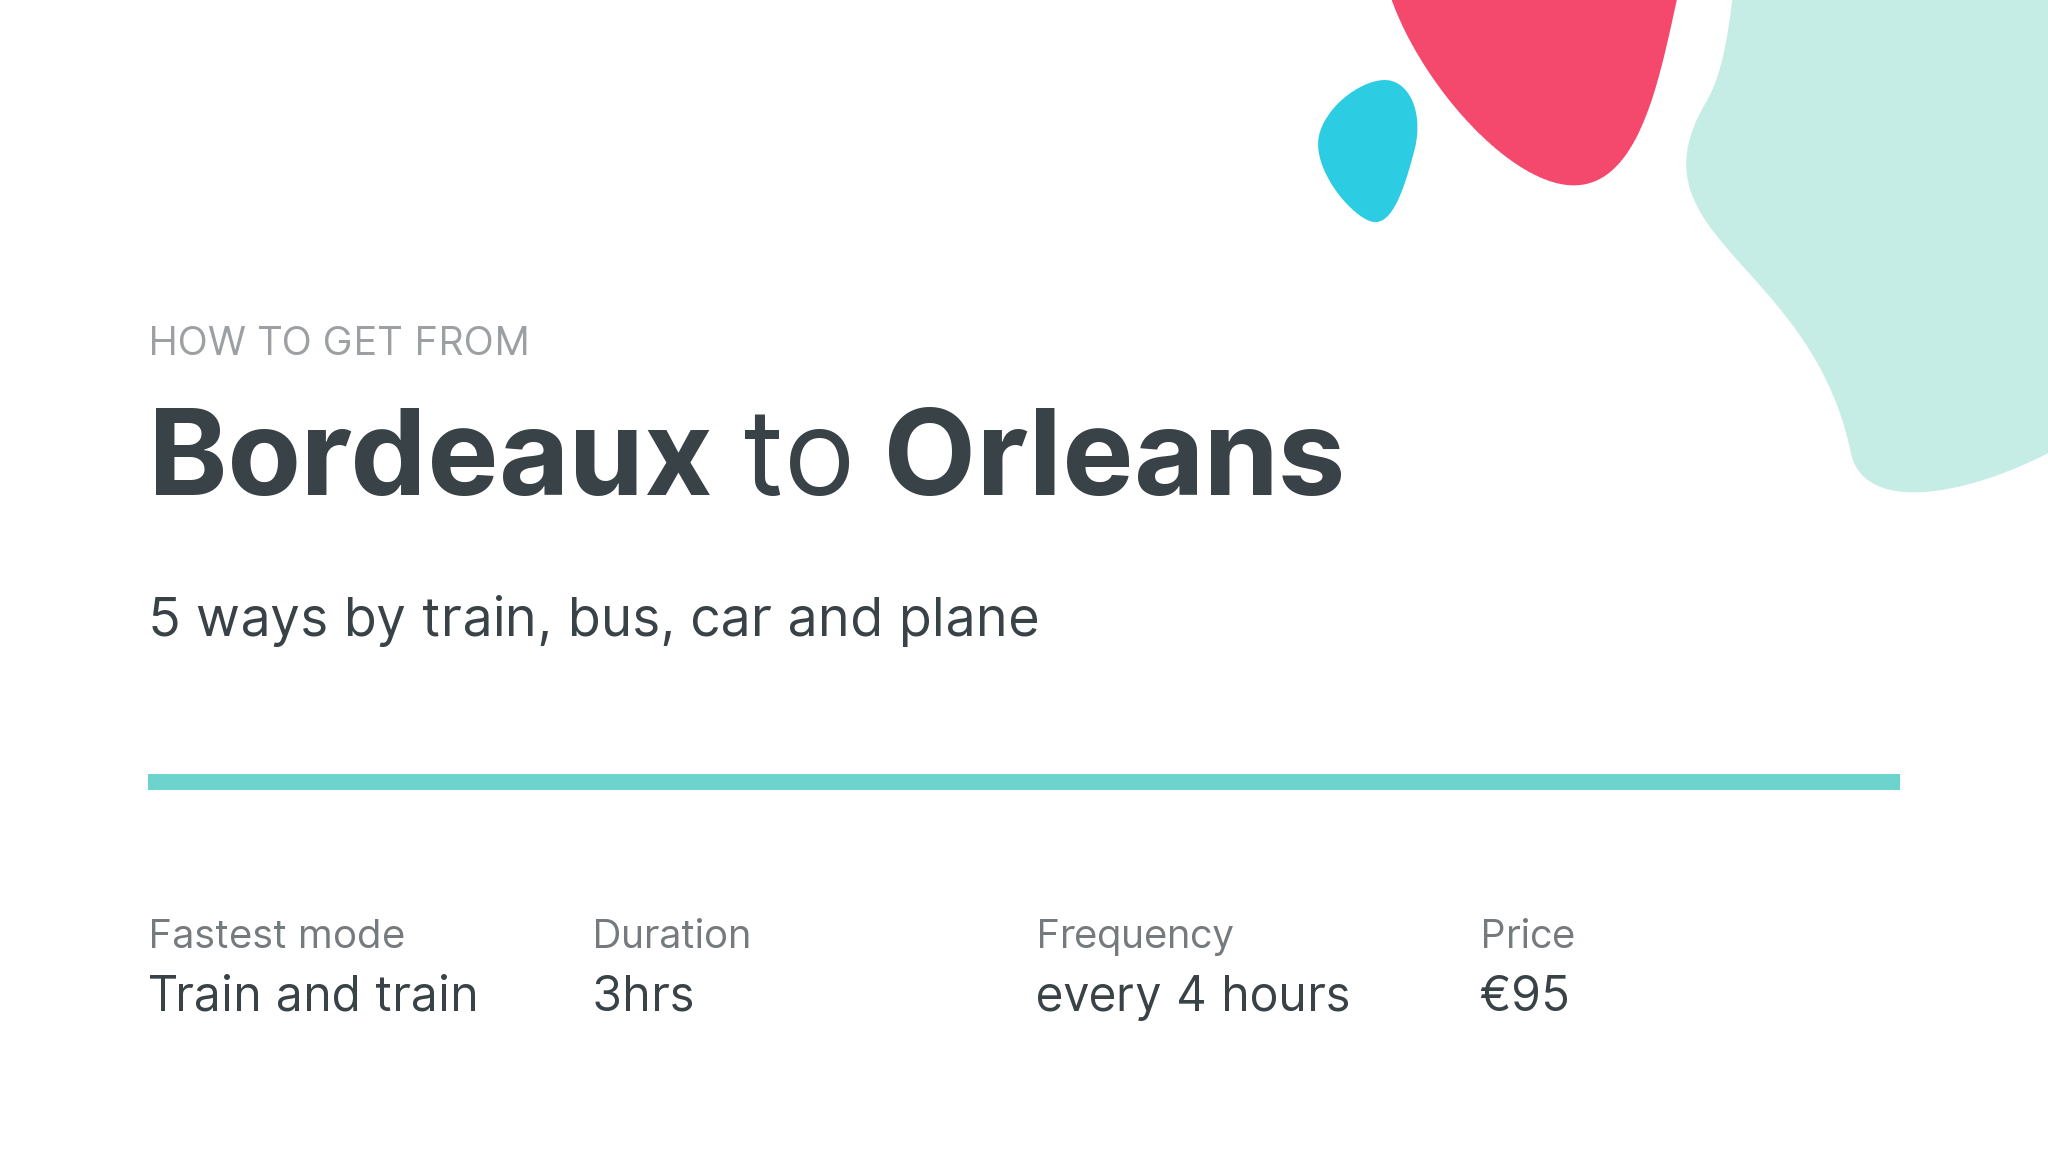 How do I get from Bordeaux to Orleans